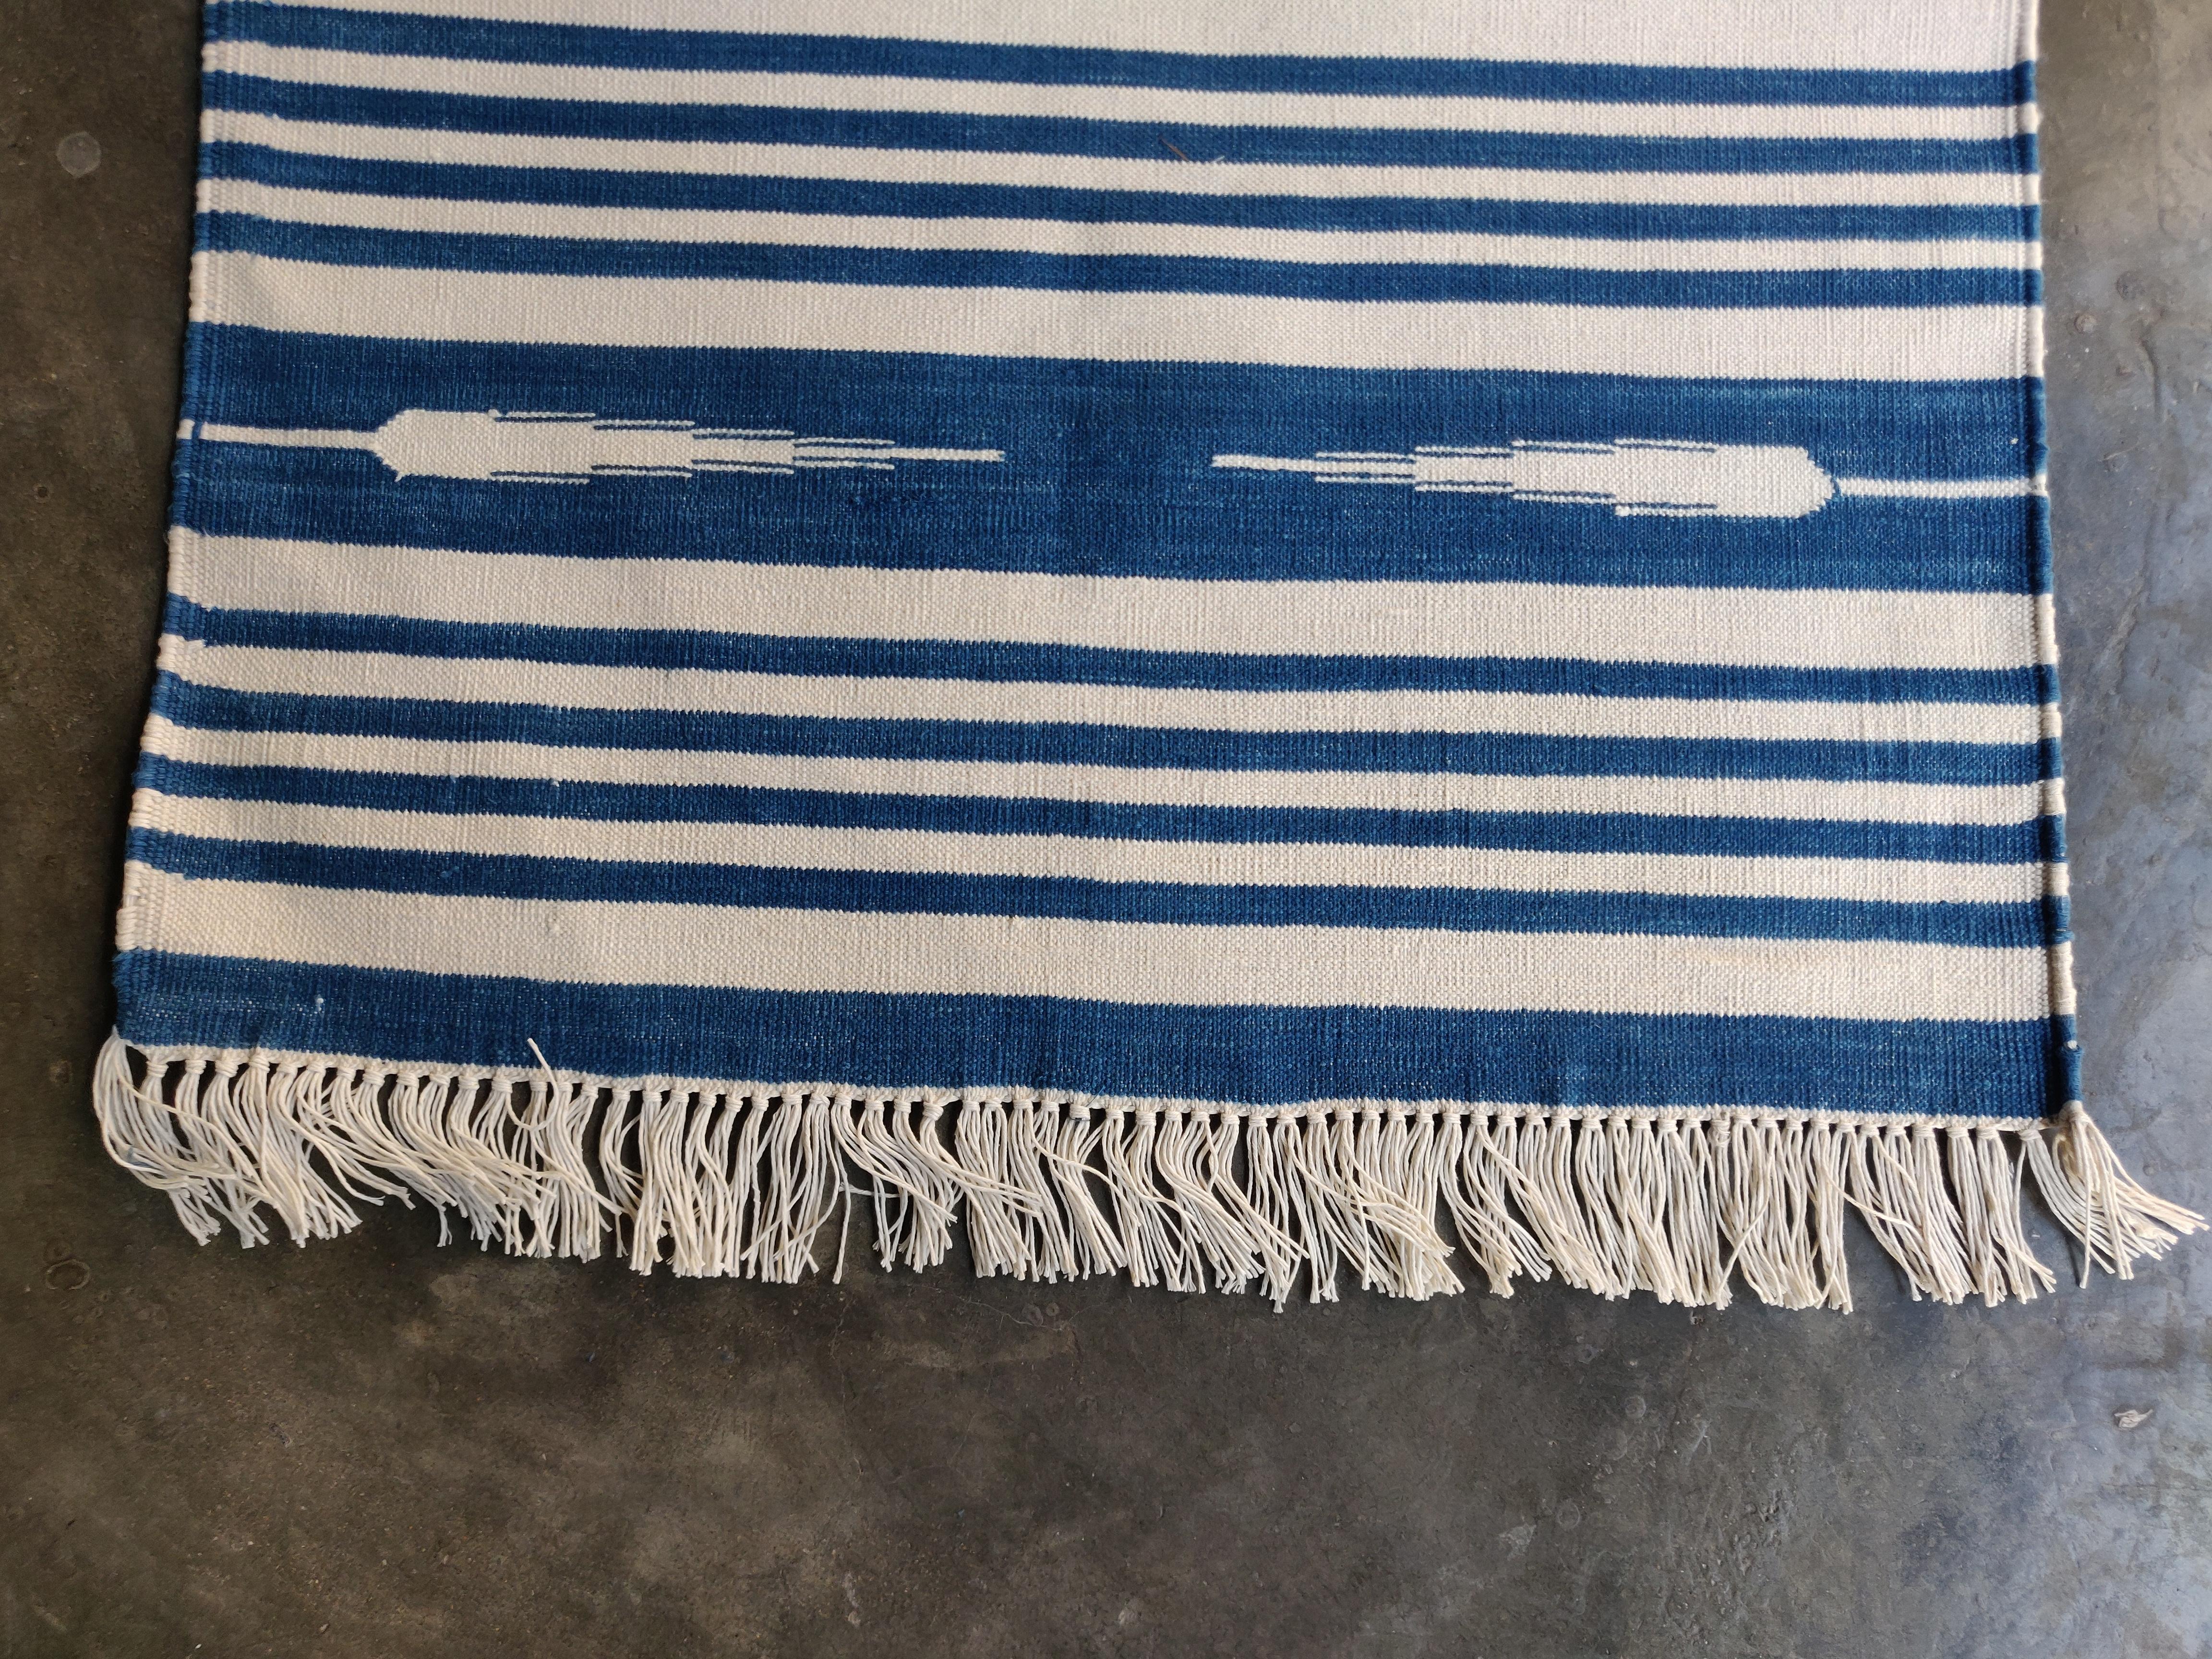 Hand-Woven Handmade Cotton Area Flat Weave Rug, 2x3 Blue And White Striped Indian Dhurrie For Sale